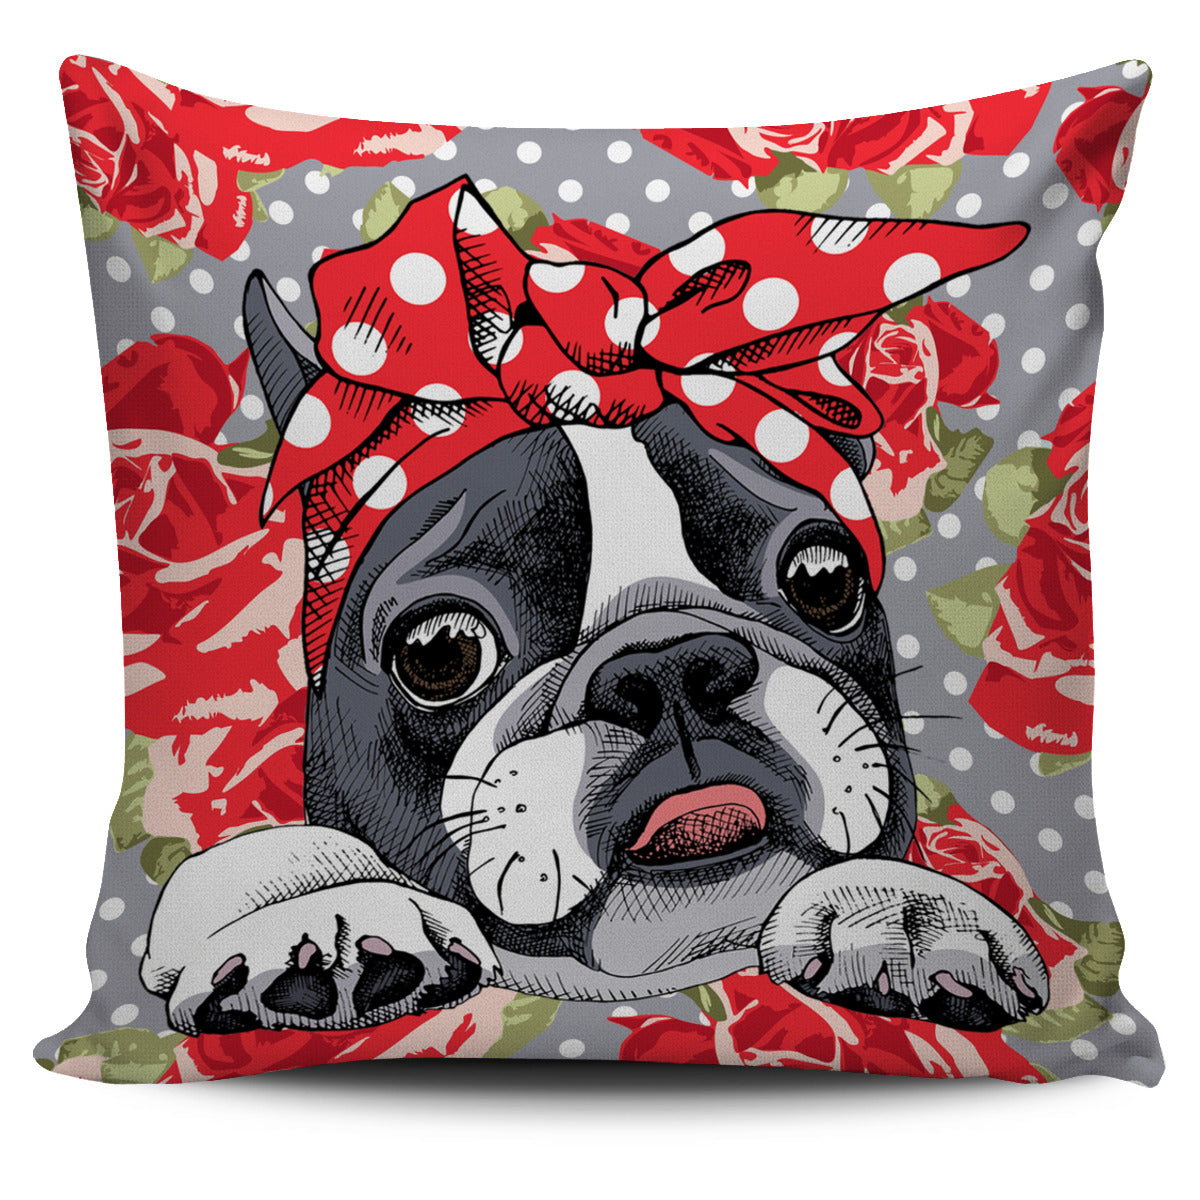 Floral Boston Terrier Red Pillow Cover